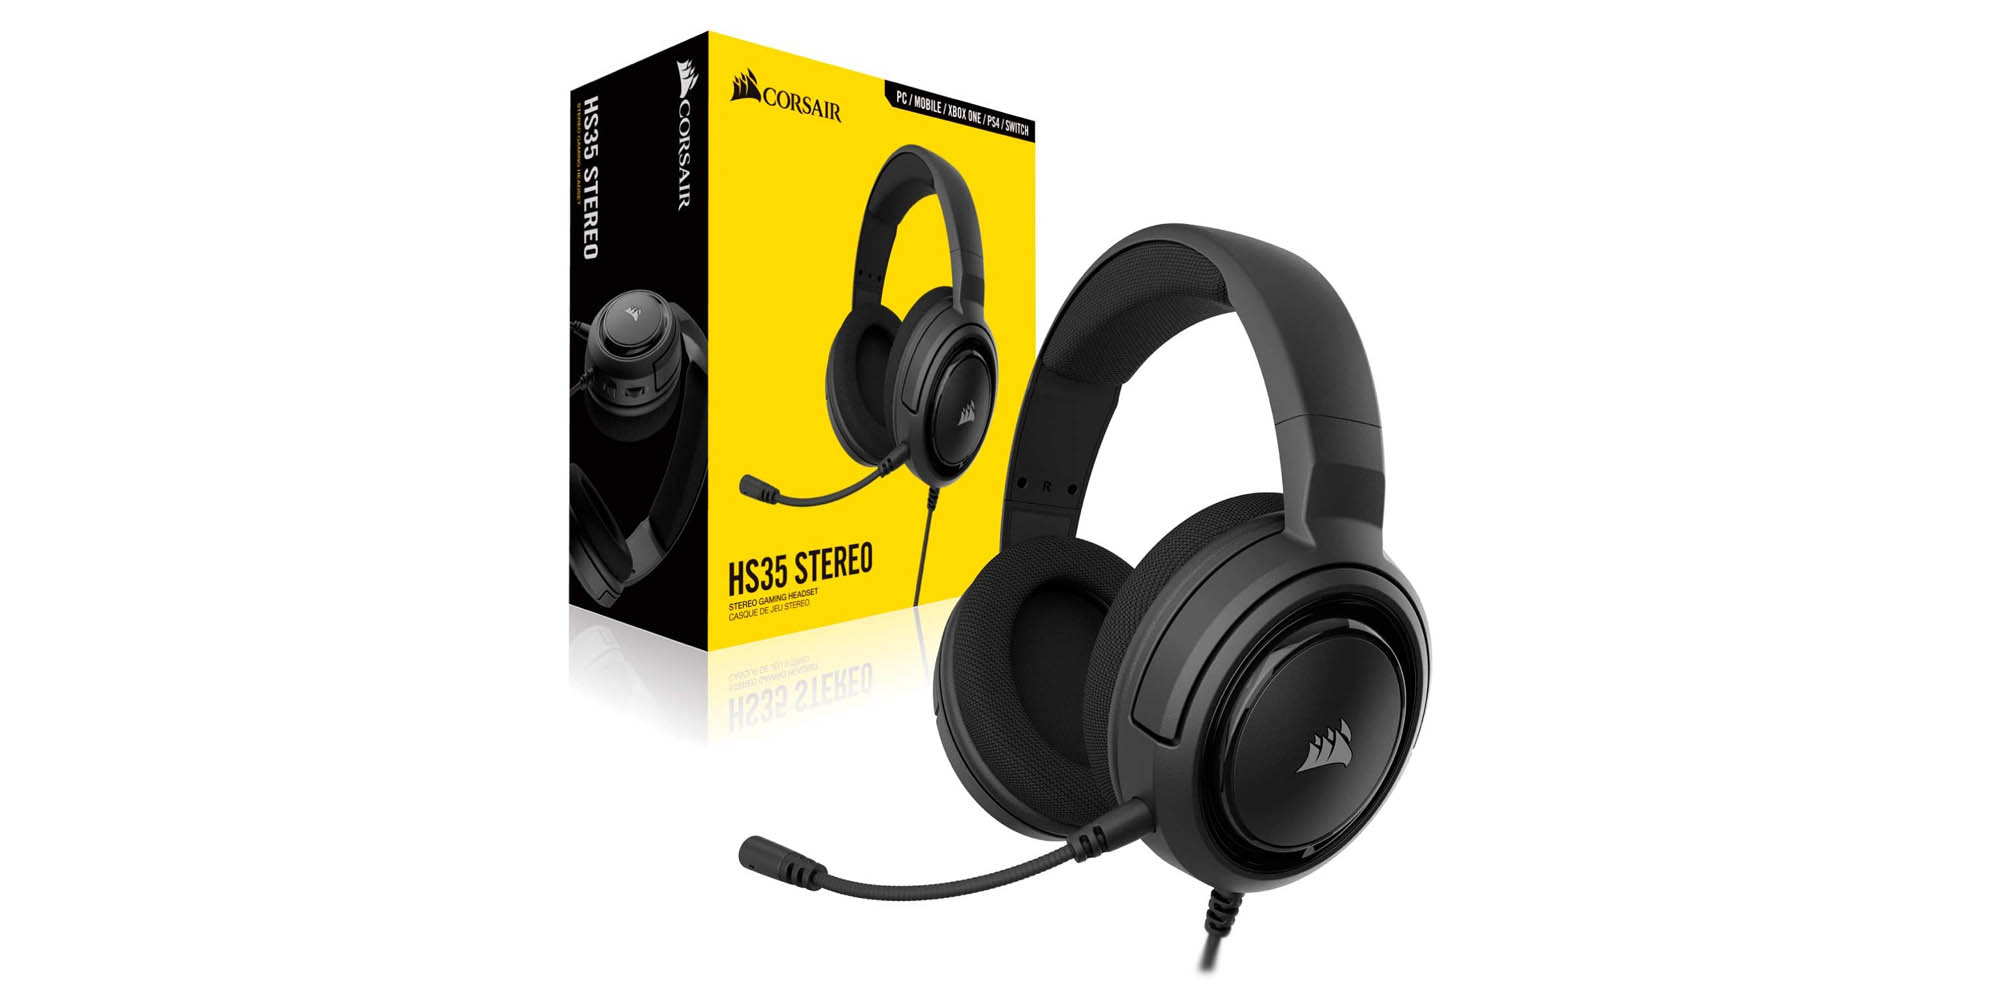 Save 20% on CORSAIR's HS35 Stereo Wired Gaming Headset in return to year  low of $40